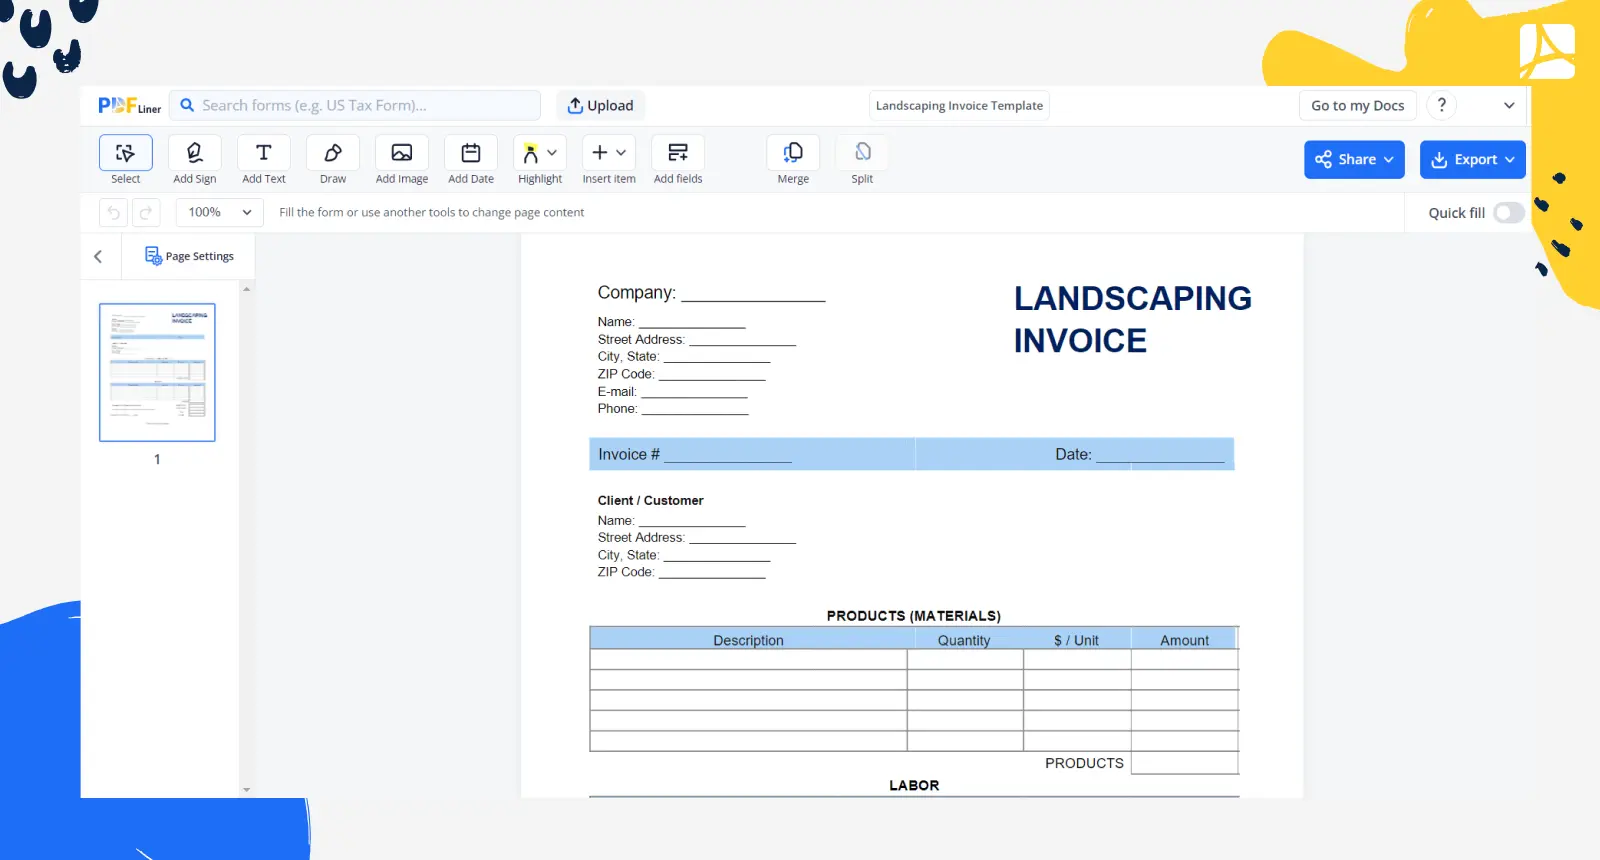 Landscaping Invoice Template Screenshot